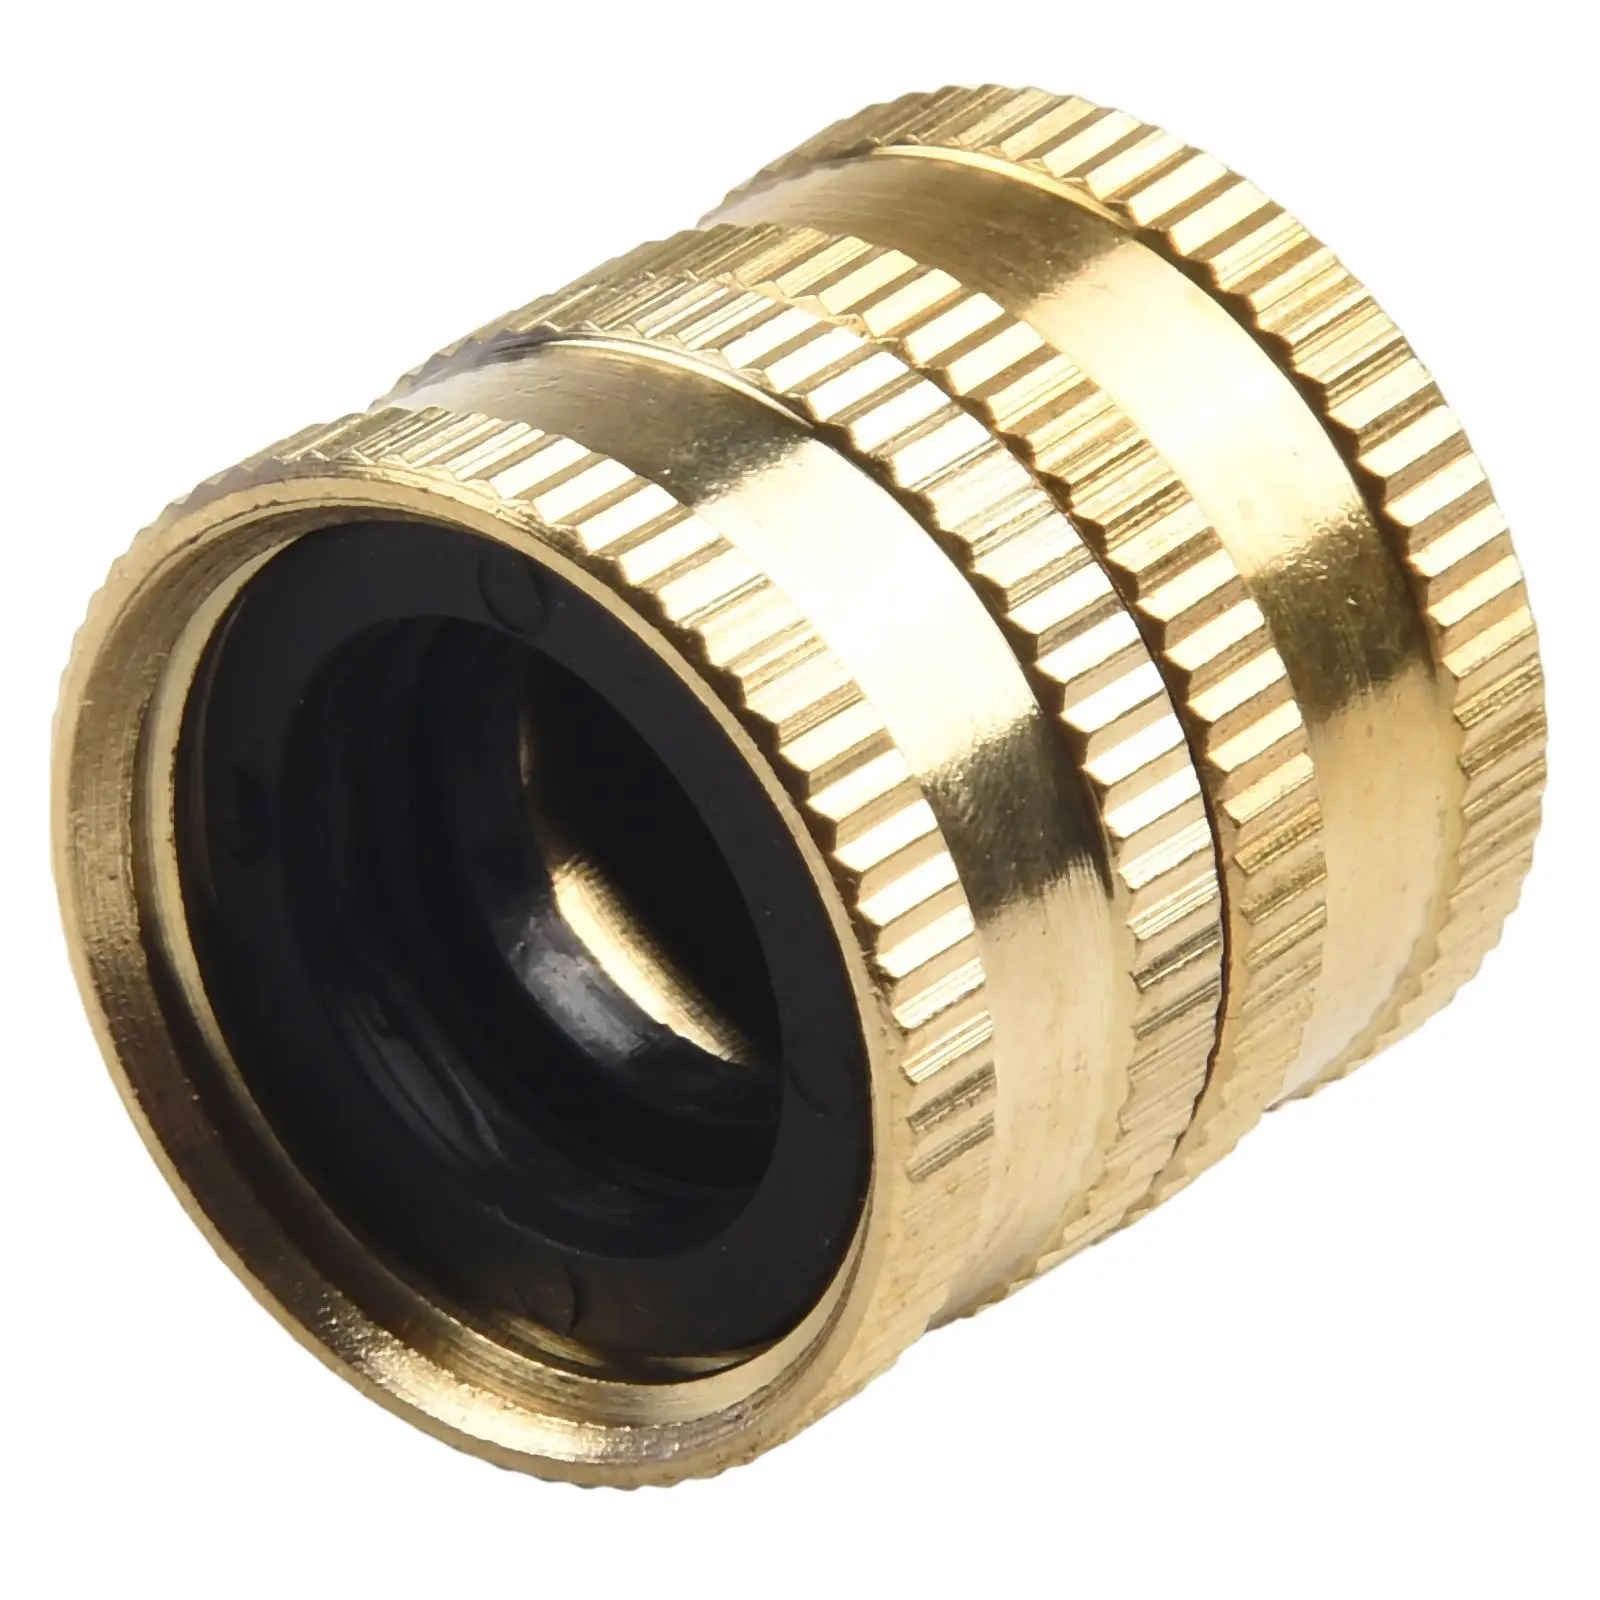 Durable Brass Hose Connector Gaskets Brass Brass Hose Connector Faucets For Garden Hose Gaskets Lawn Sprinklers